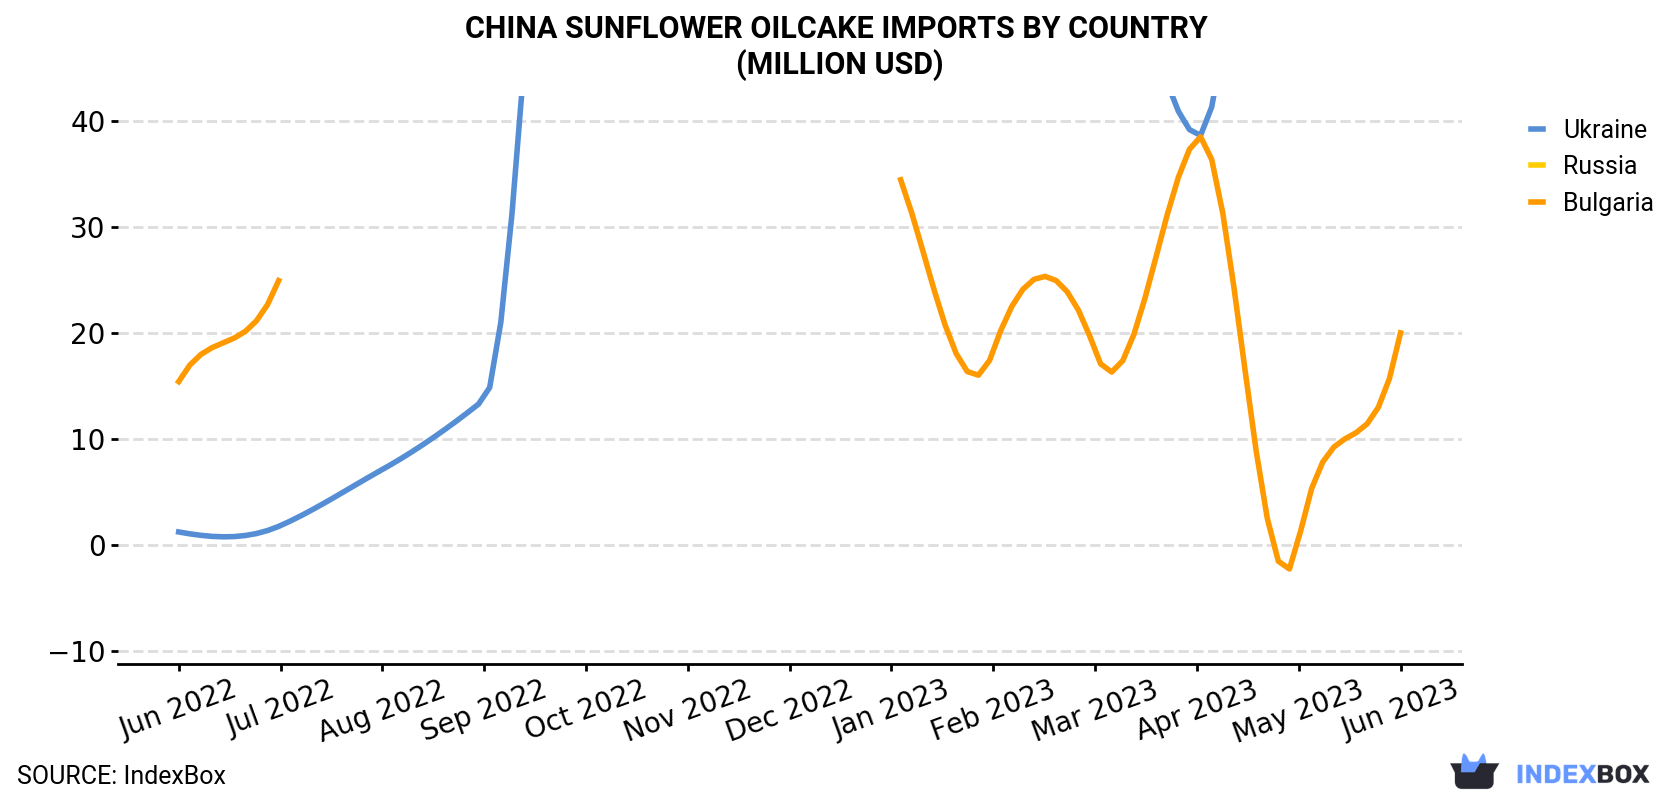 China Sunflower Oilcake Imports By Country (Million USD)